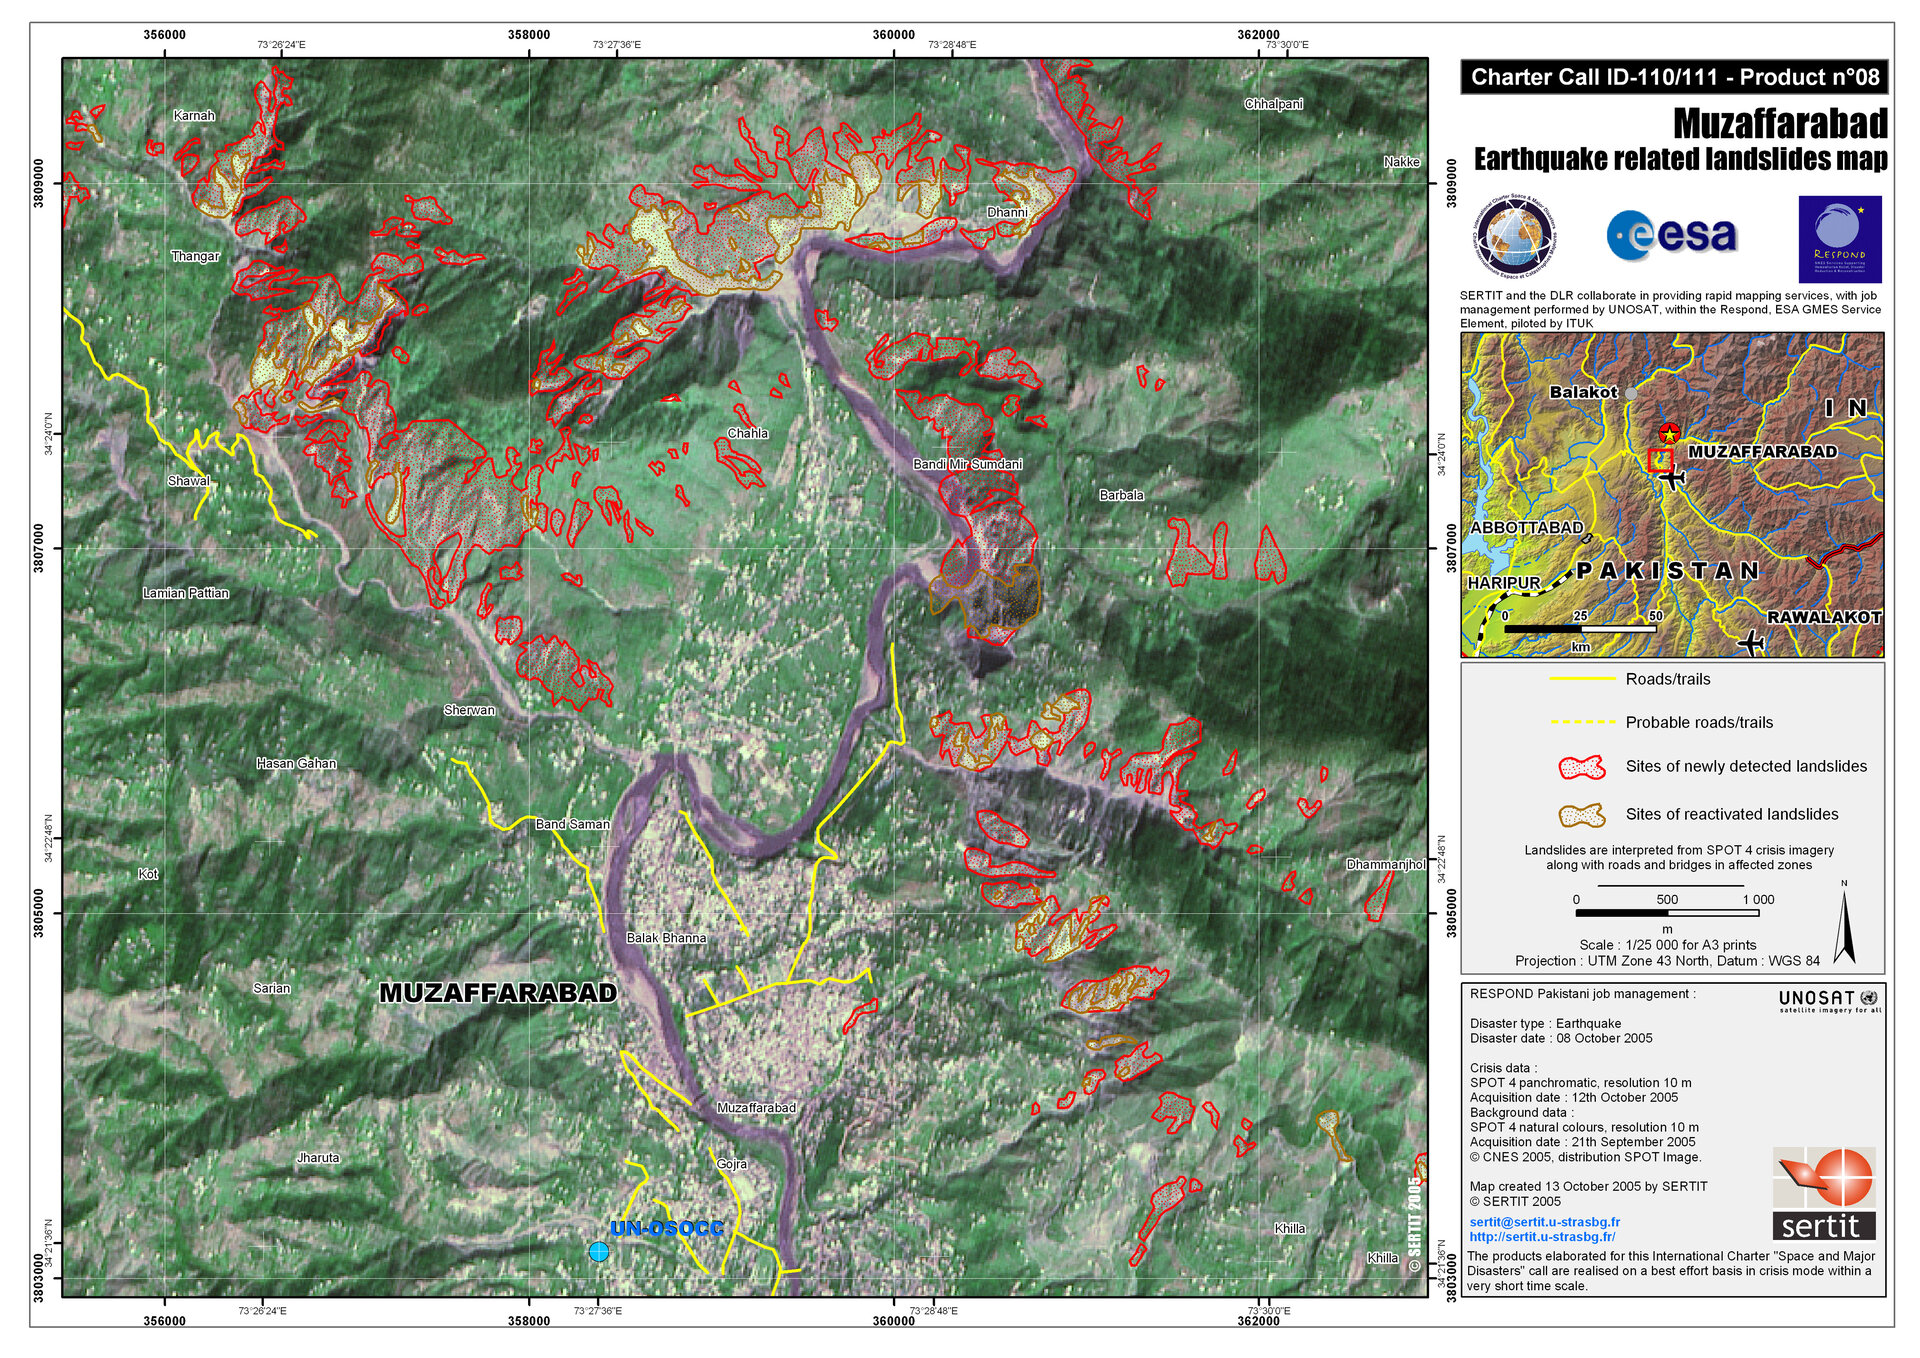 Mapping earthquake-related landslides